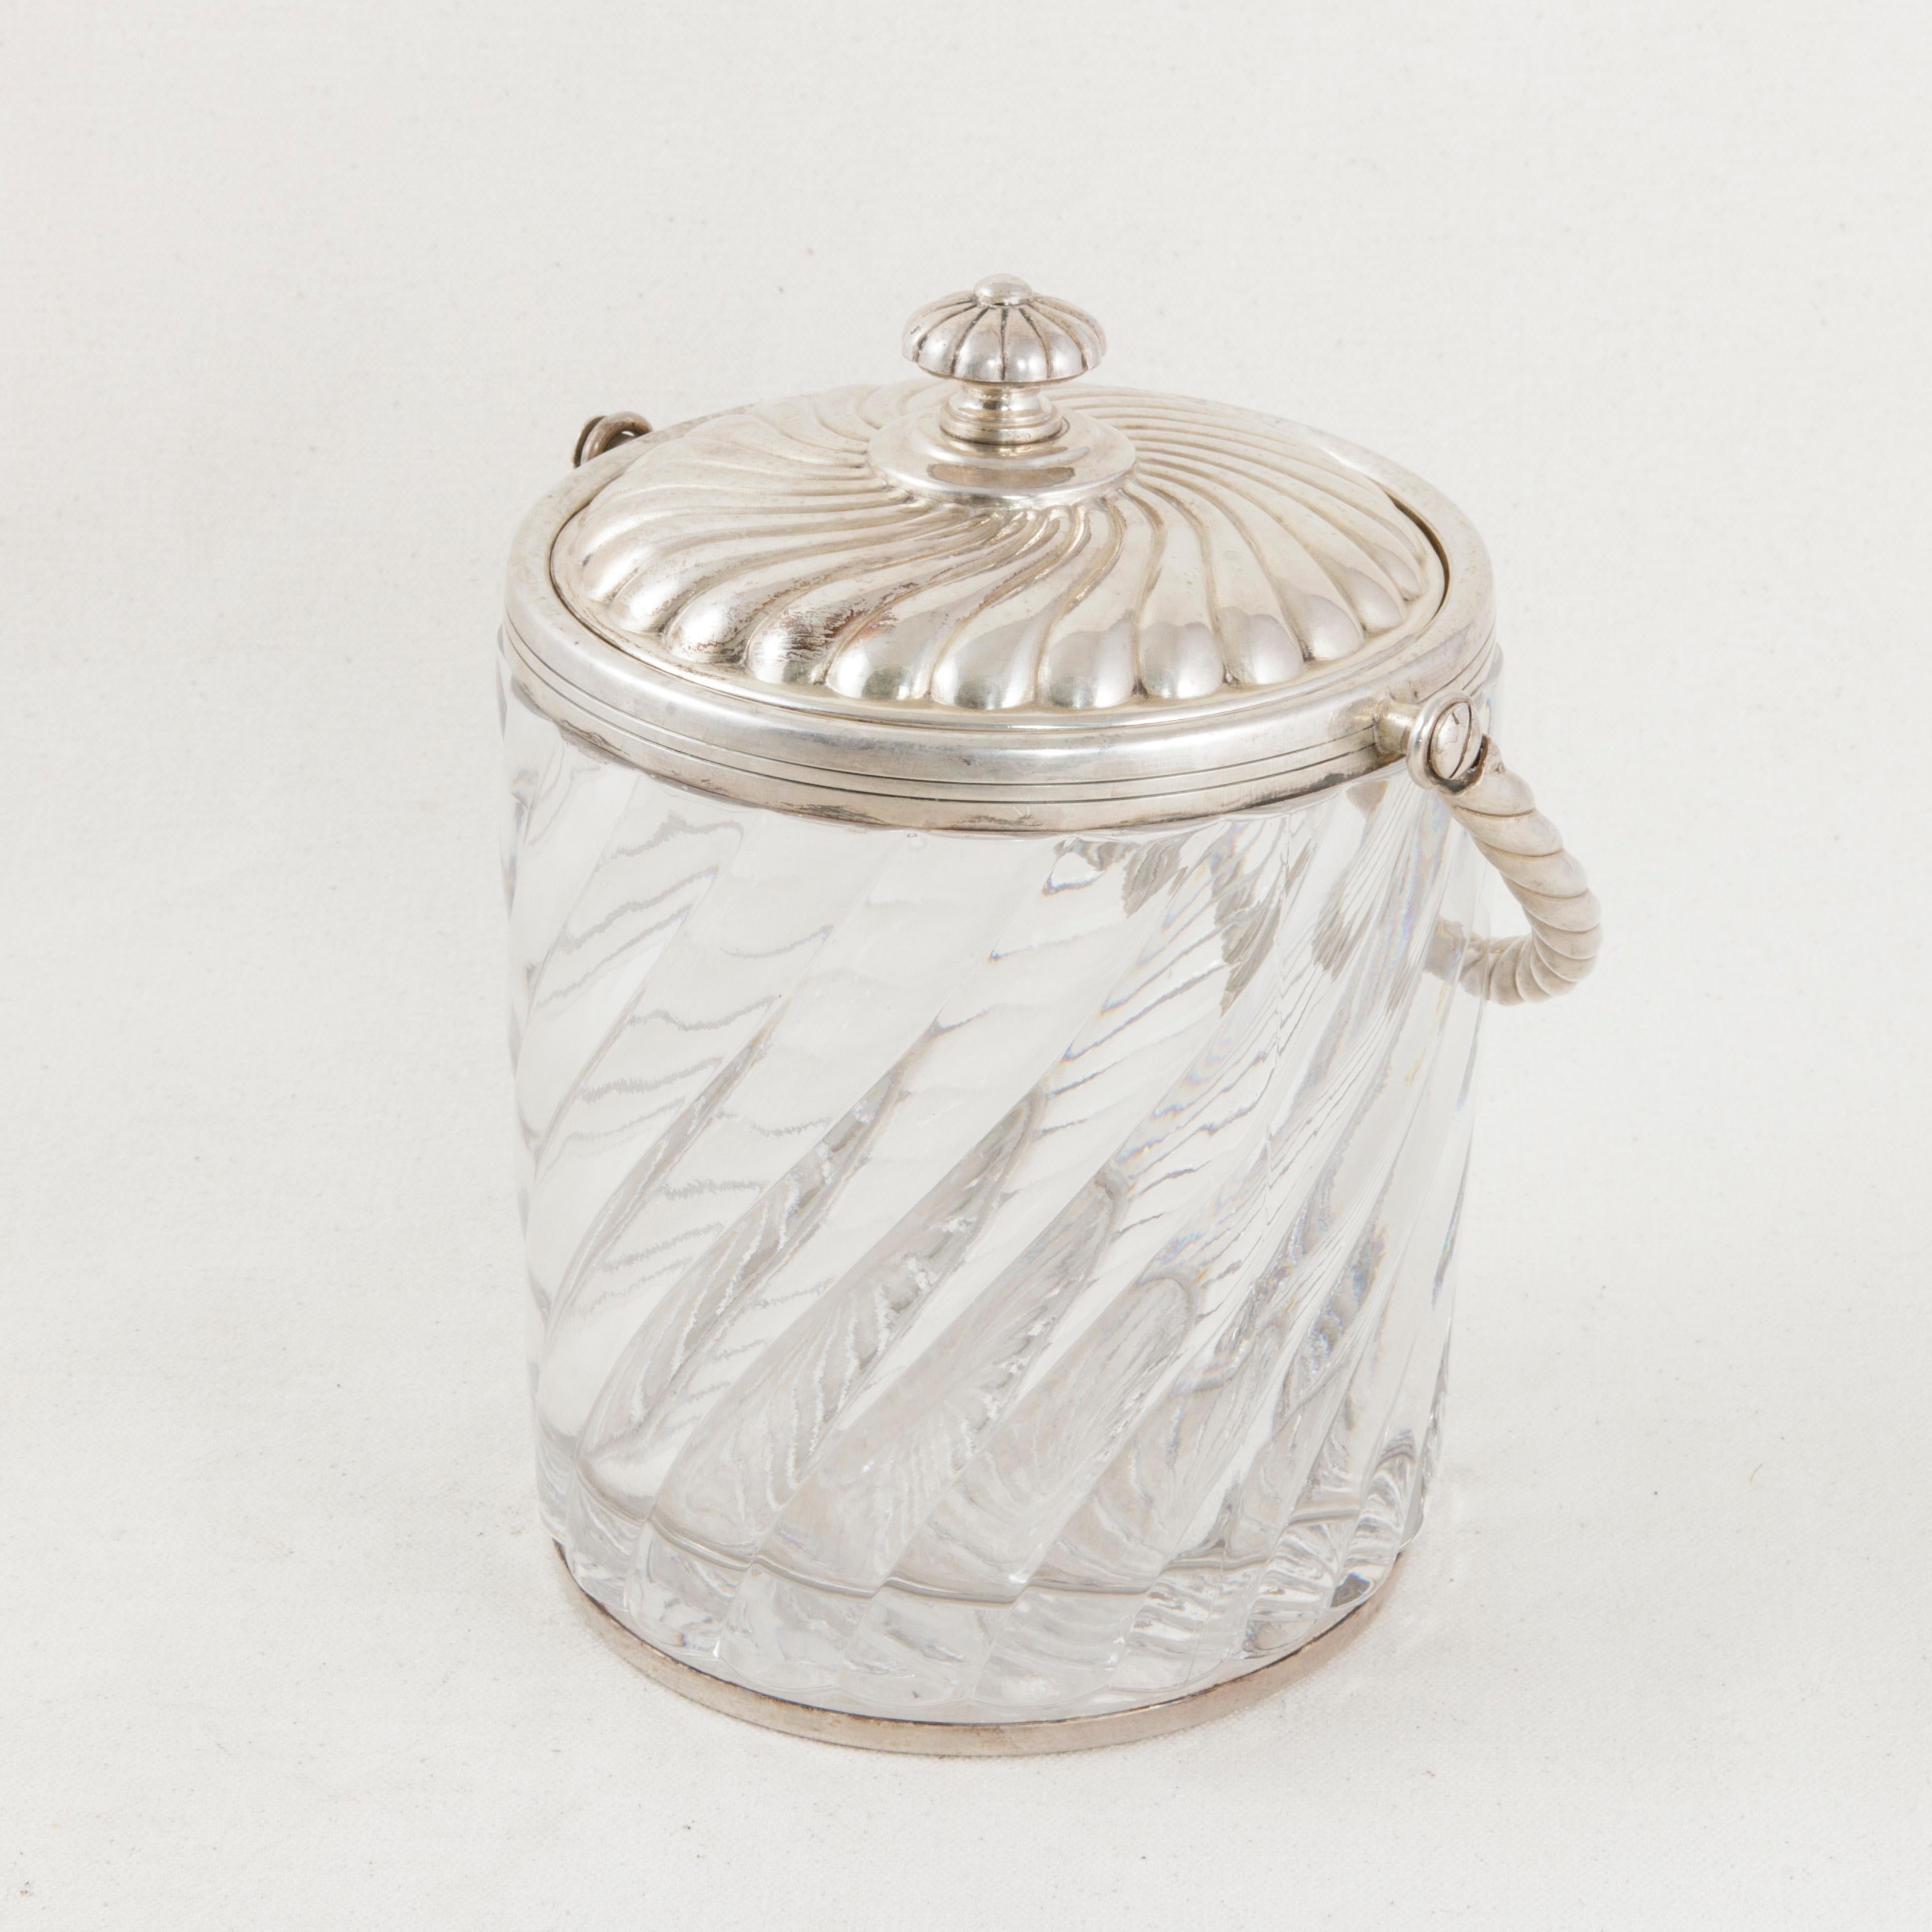 This early 20th century French ice bucket features a crystal bowl marked Baccarat Depose or Trademarked Baccarat on the bottom of the interior. A sterling silver band around the top holds a handle in place and is stamped with silver hallmarks. A